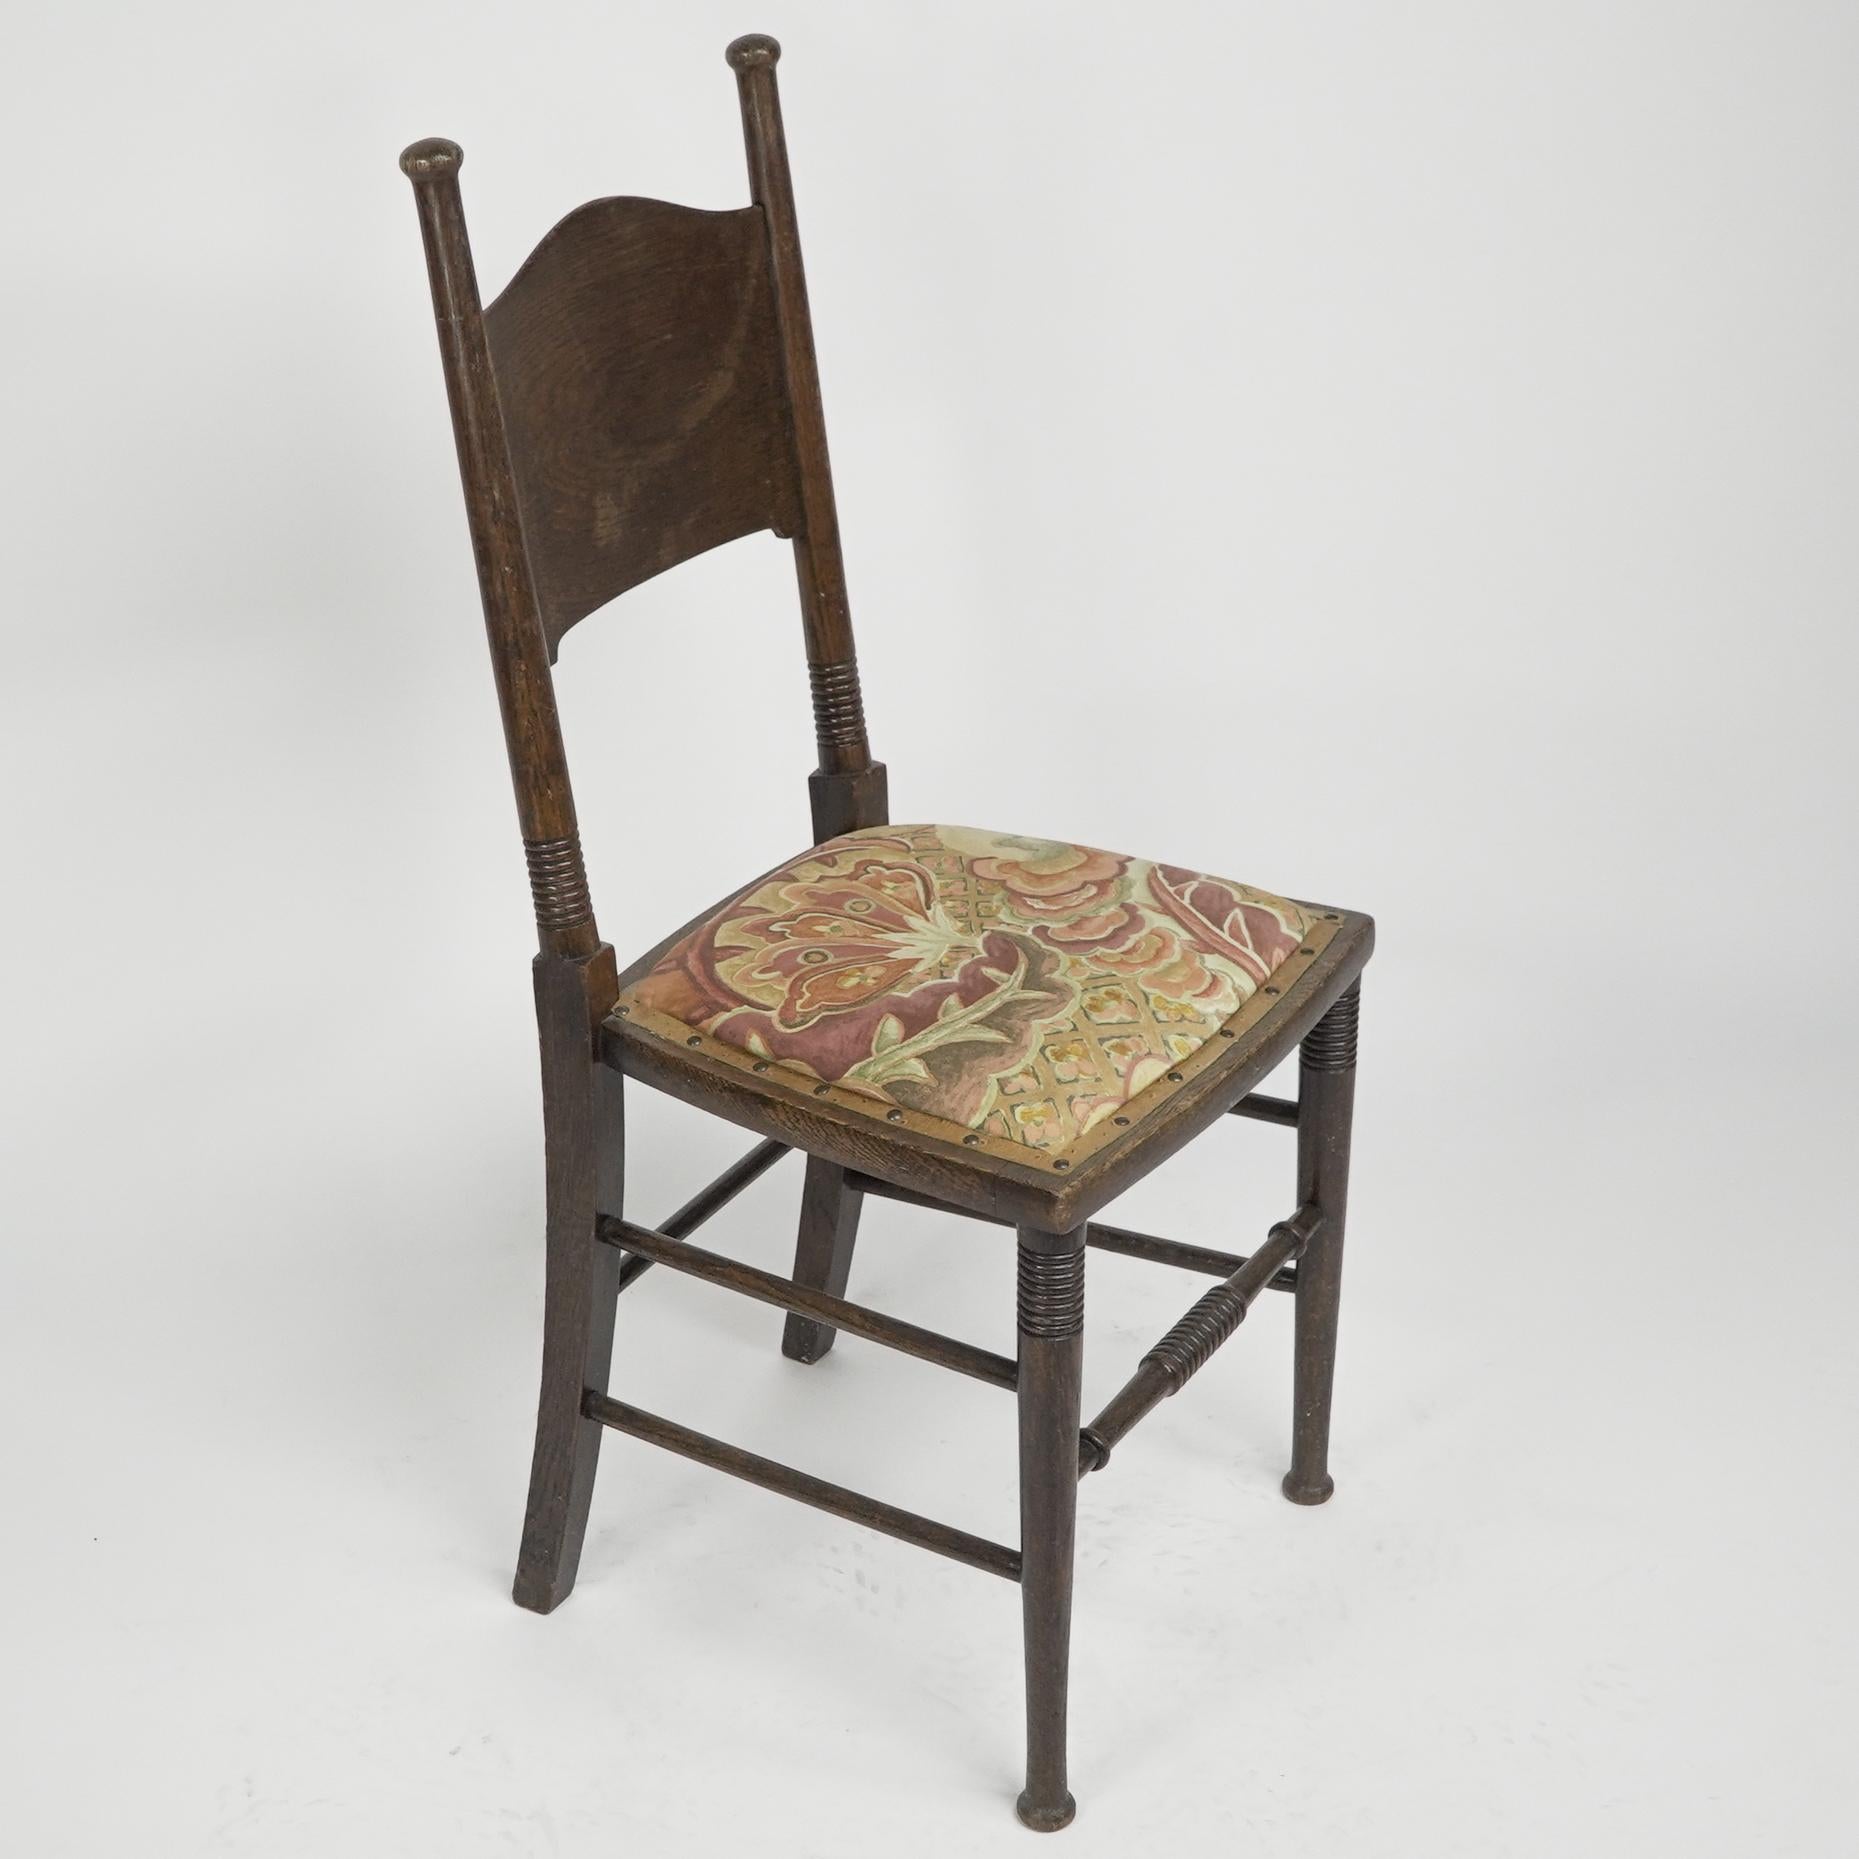 William Birch An Arts and Crafts Oak upholstered chair.
